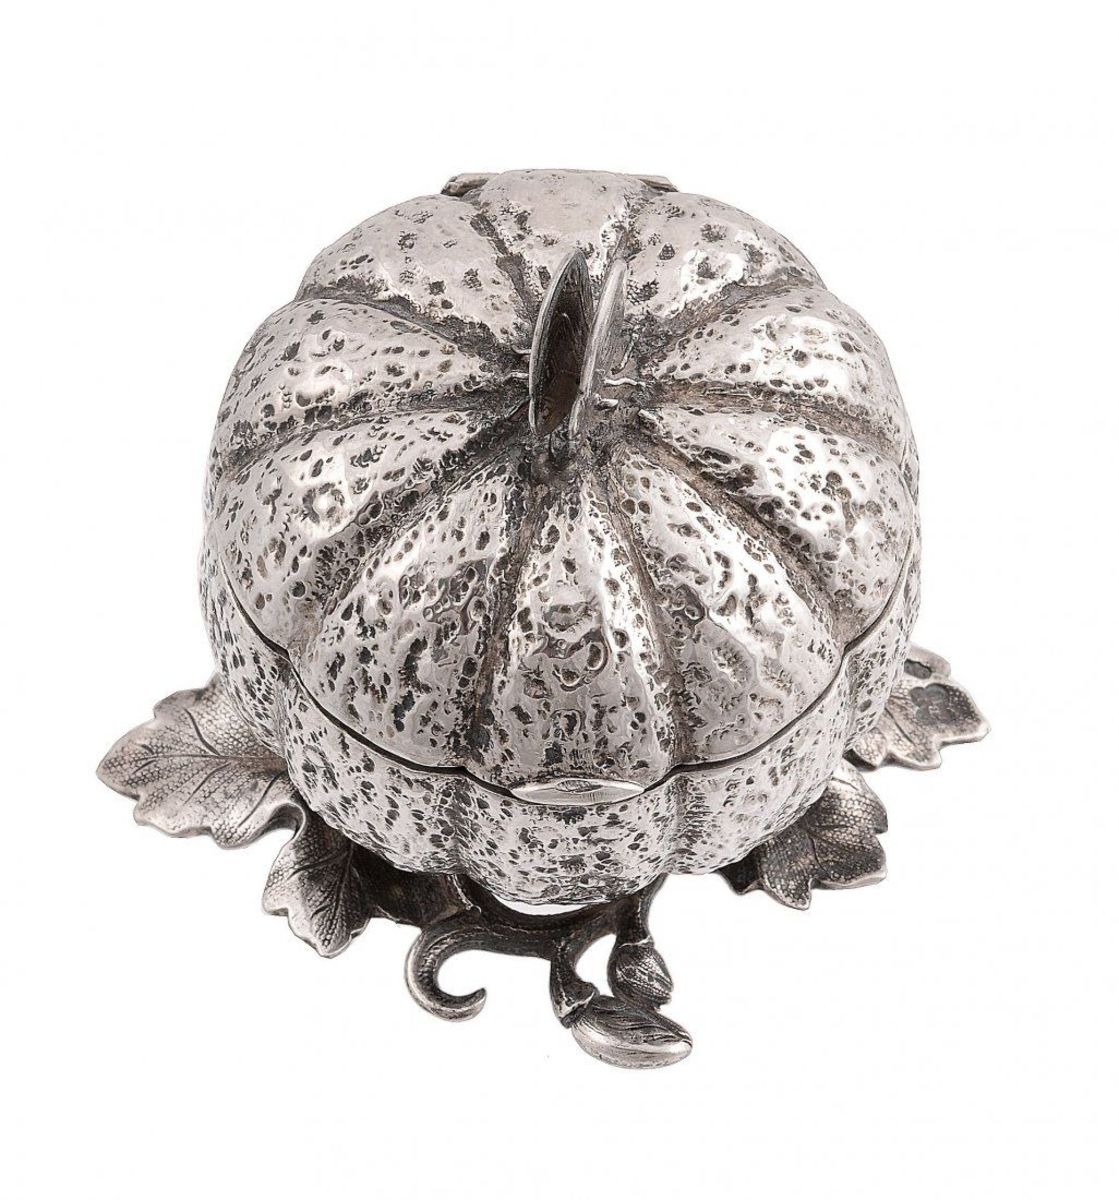 An unusual early Victorian silver table-top nutmeg grater by Edward, Edward Jr., John & William Barnard, London, 1846, with a butterfly finial to the hinged cover, a hinged steel grater inside and a cast leafy base, 2-1/2” h; $10,000.